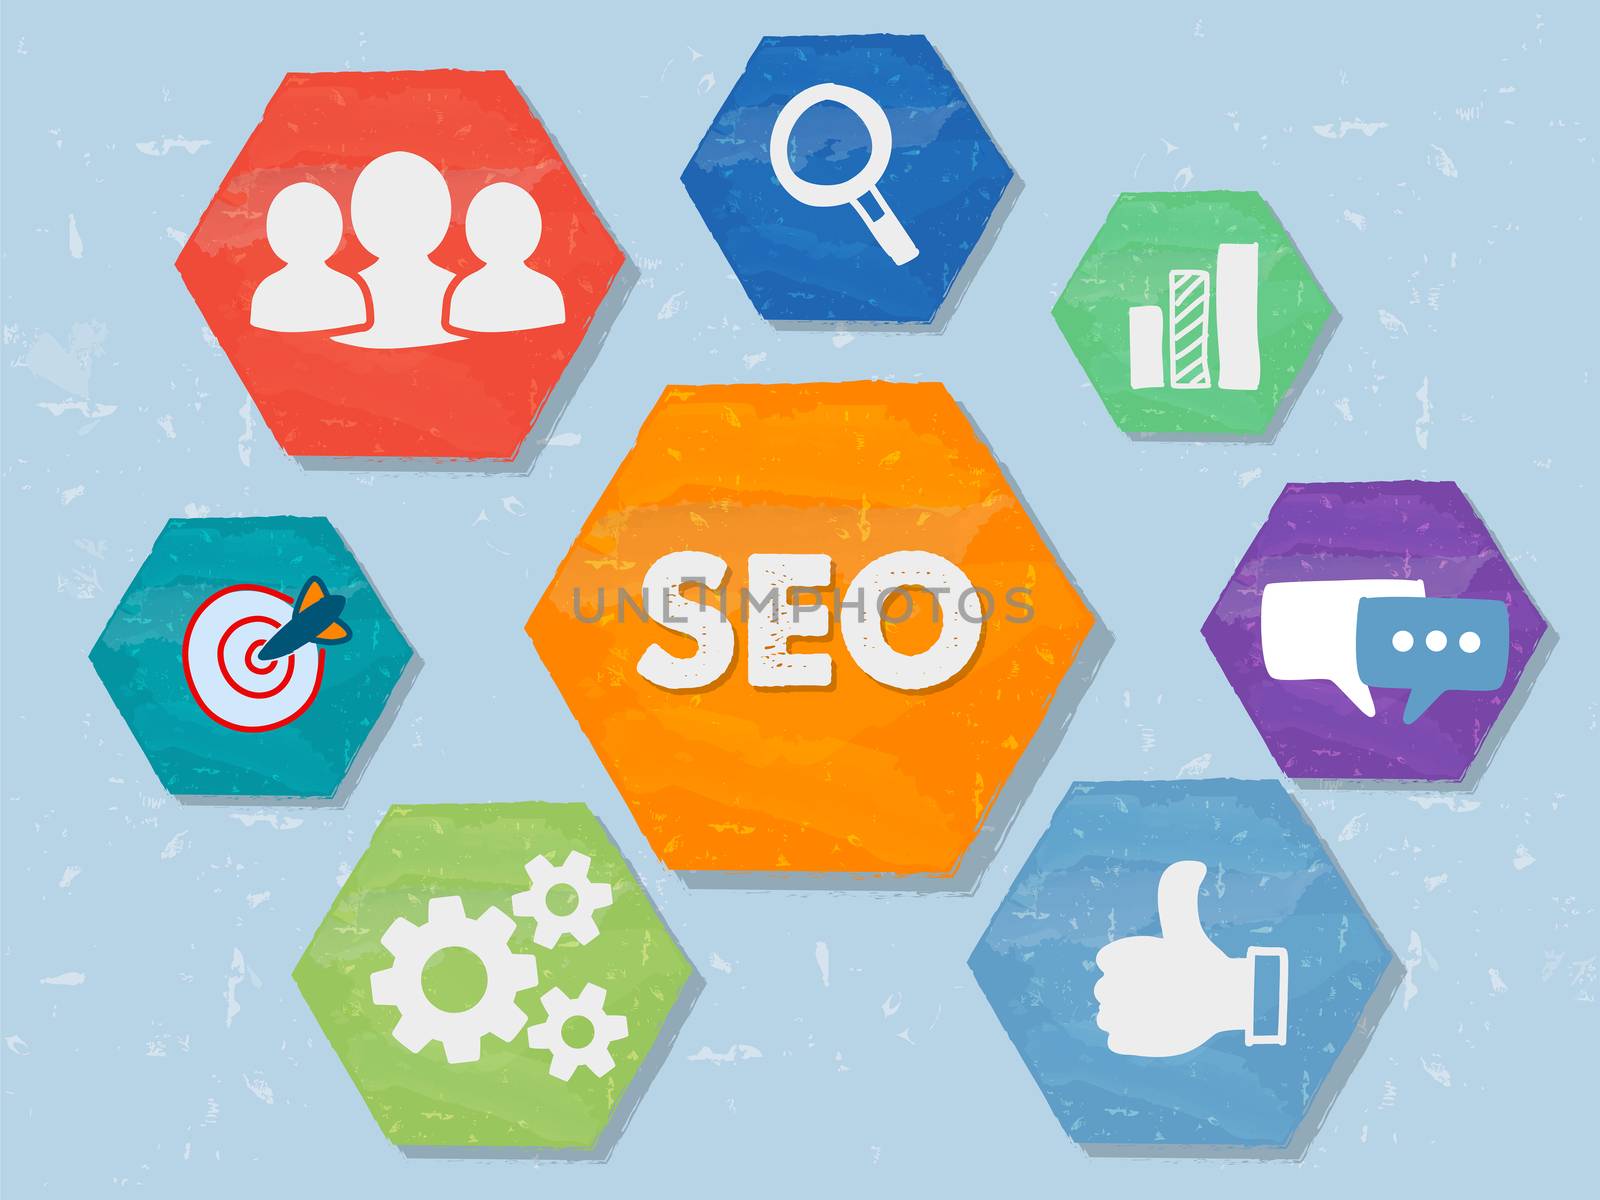 SEO and internet signs - white symbols in colorful grunge flat design hexagons, business technology concept icons